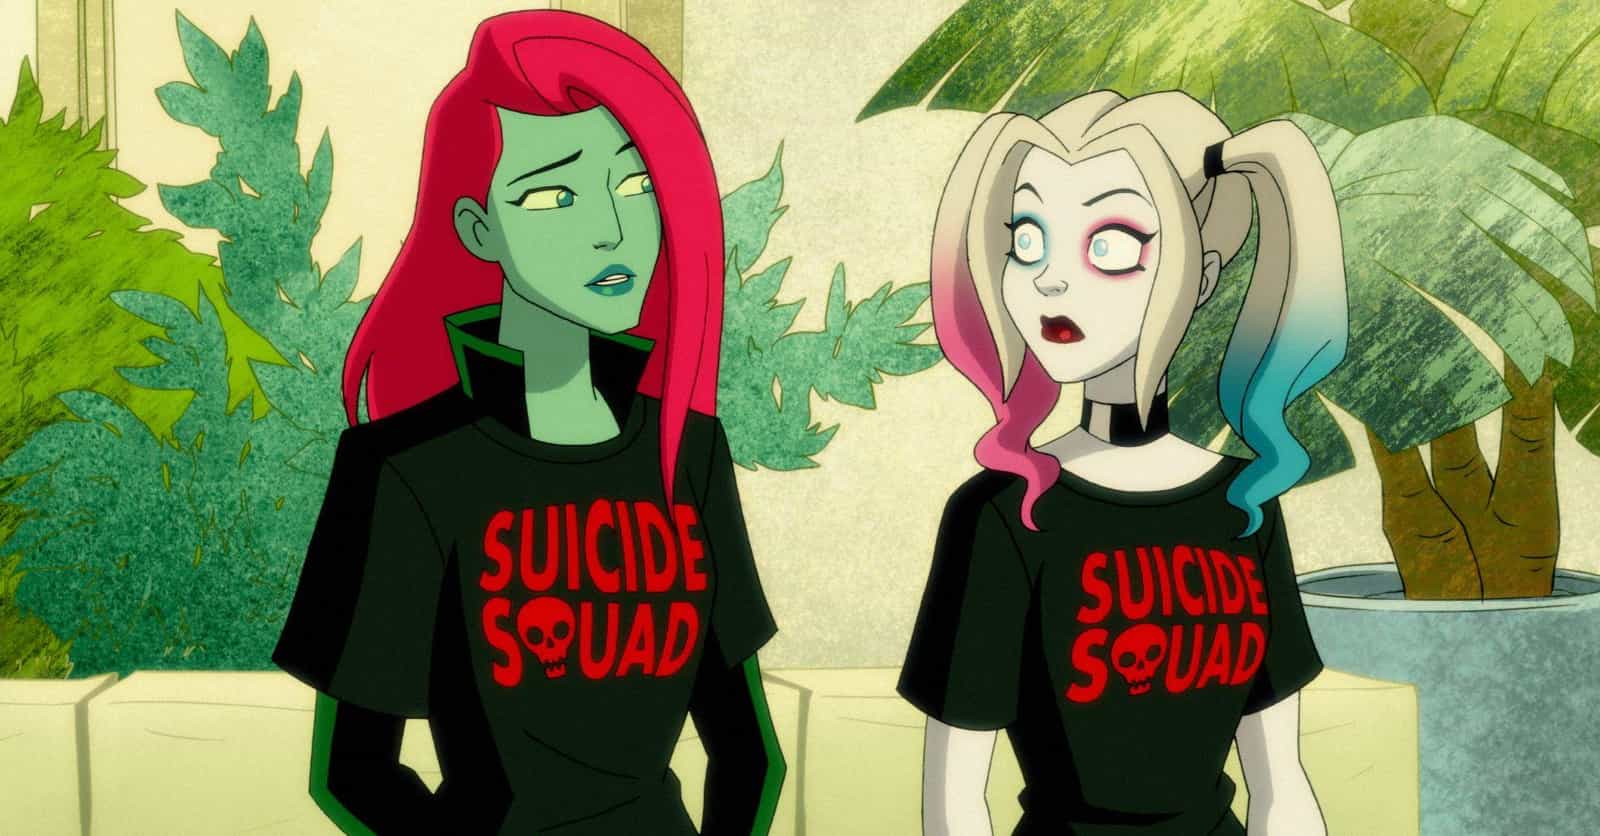 Seriously Clever Easter Eggs From DC Universe's 'Harley Quinn'